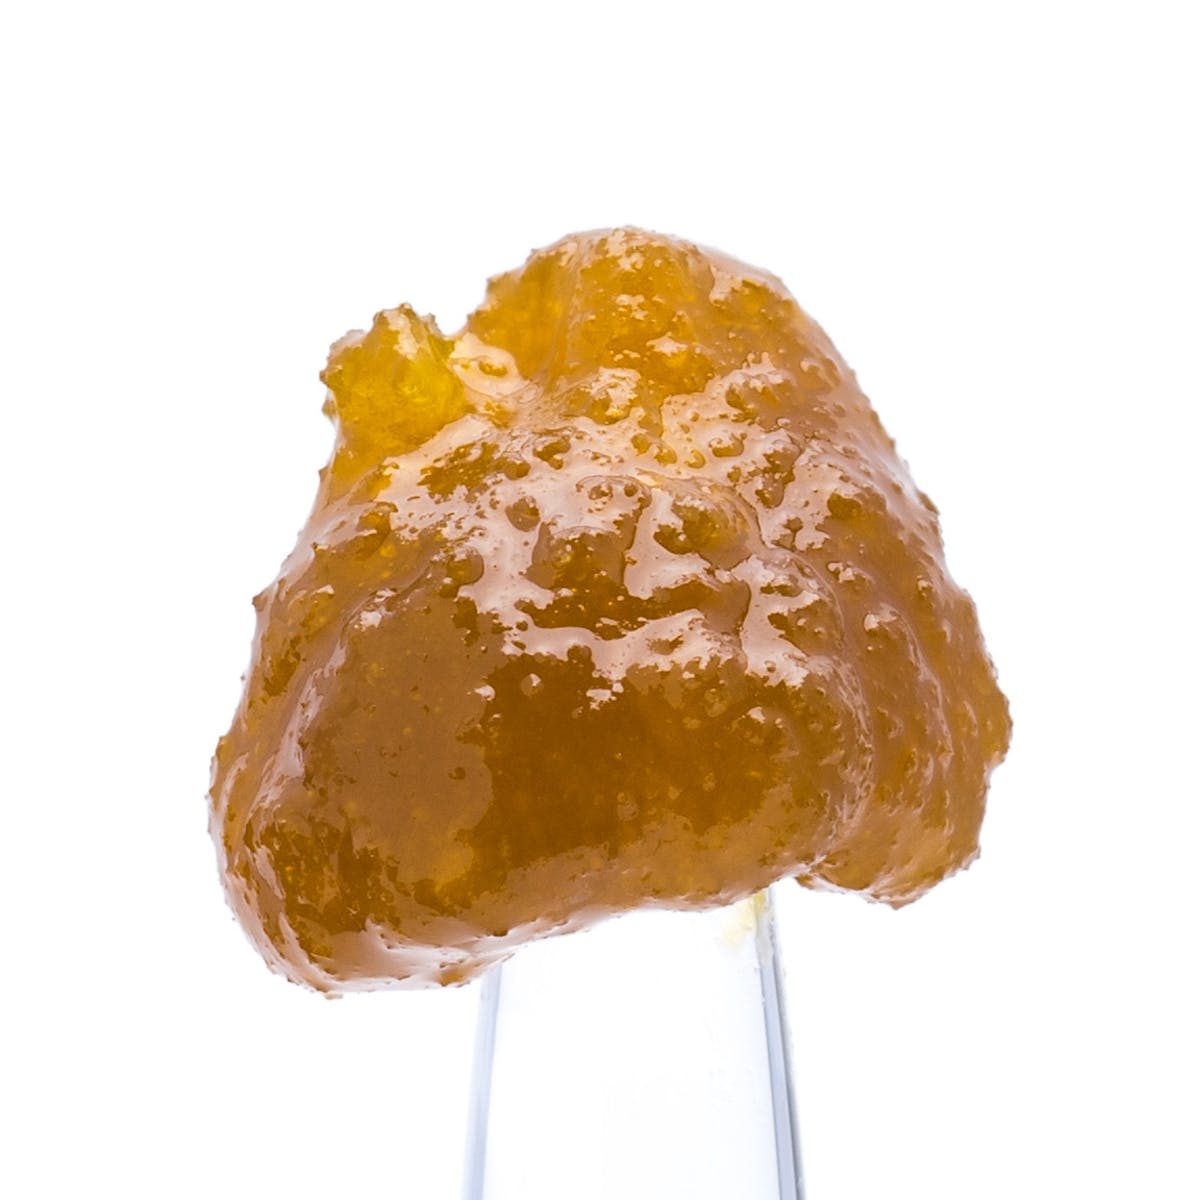 concentrate-buddies-brand-game-changer-live-resin-fresh-frozen